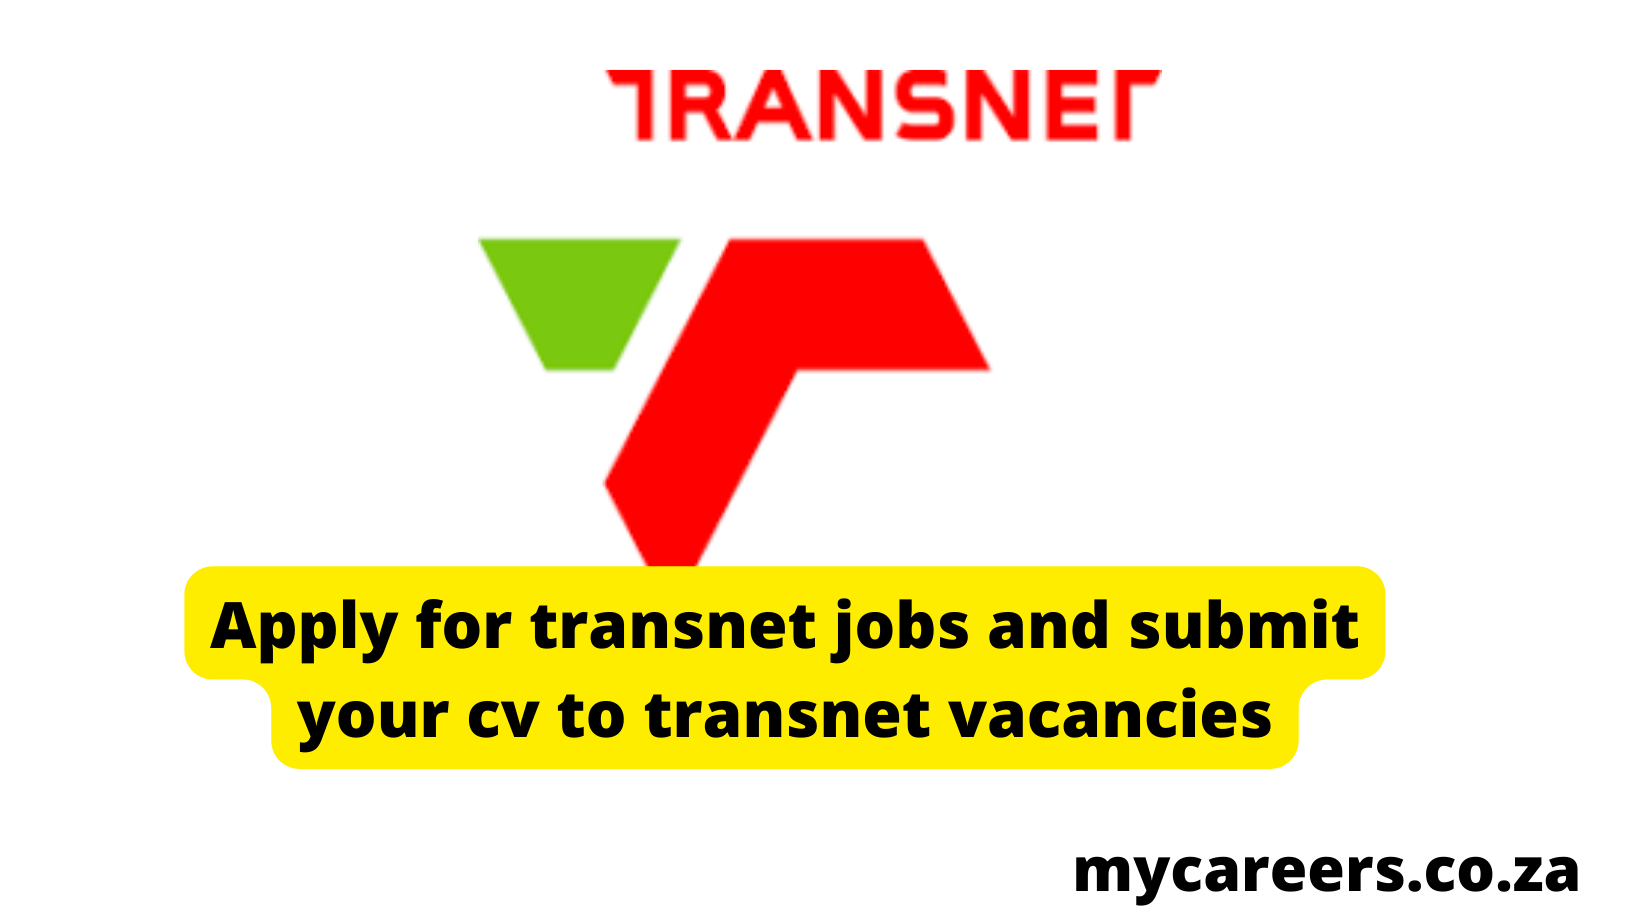 Apply for transnet jobs and submit your cv to transnet vacancies